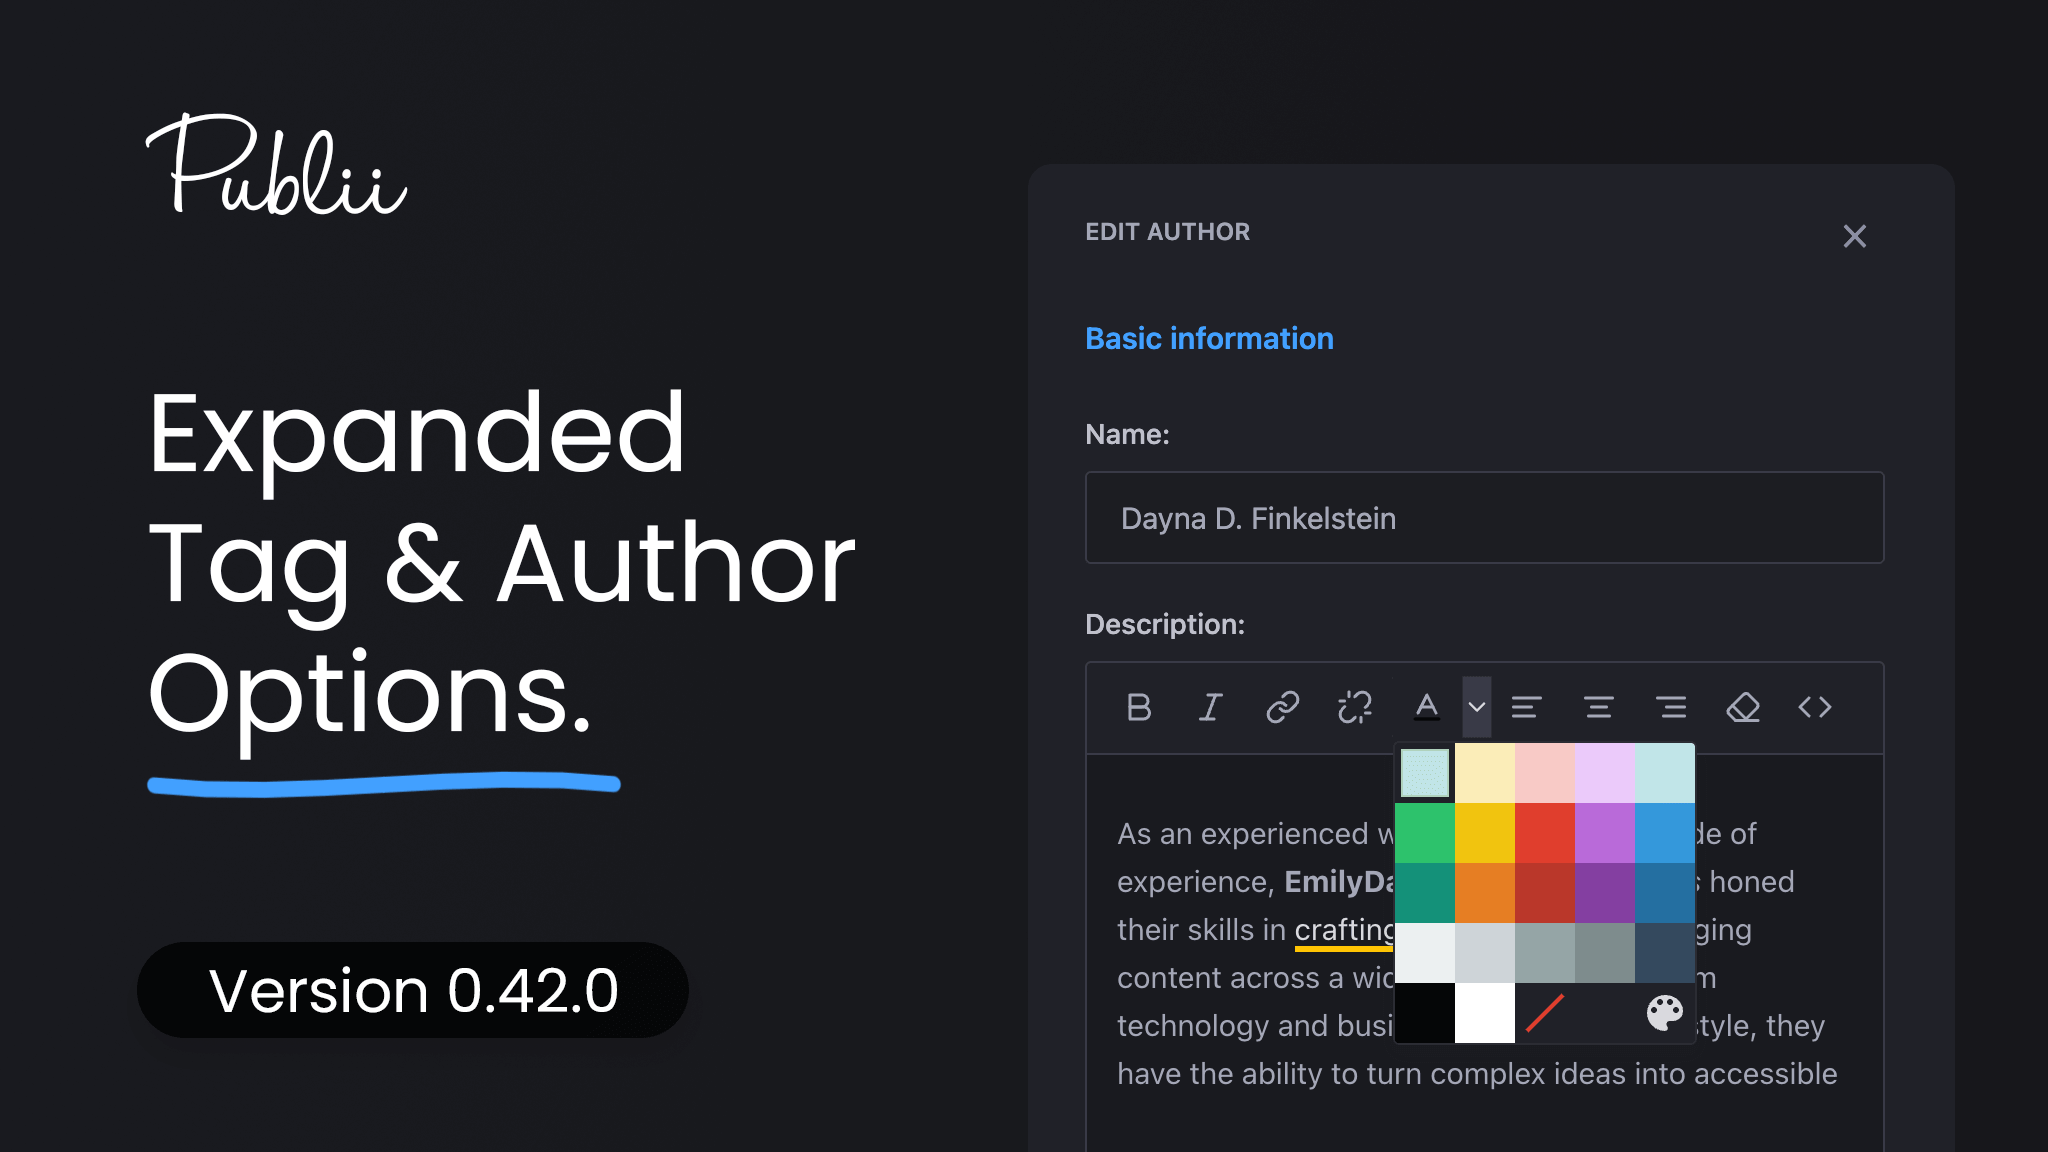 Publii updated to version 0.42, adding expanded tag and author options